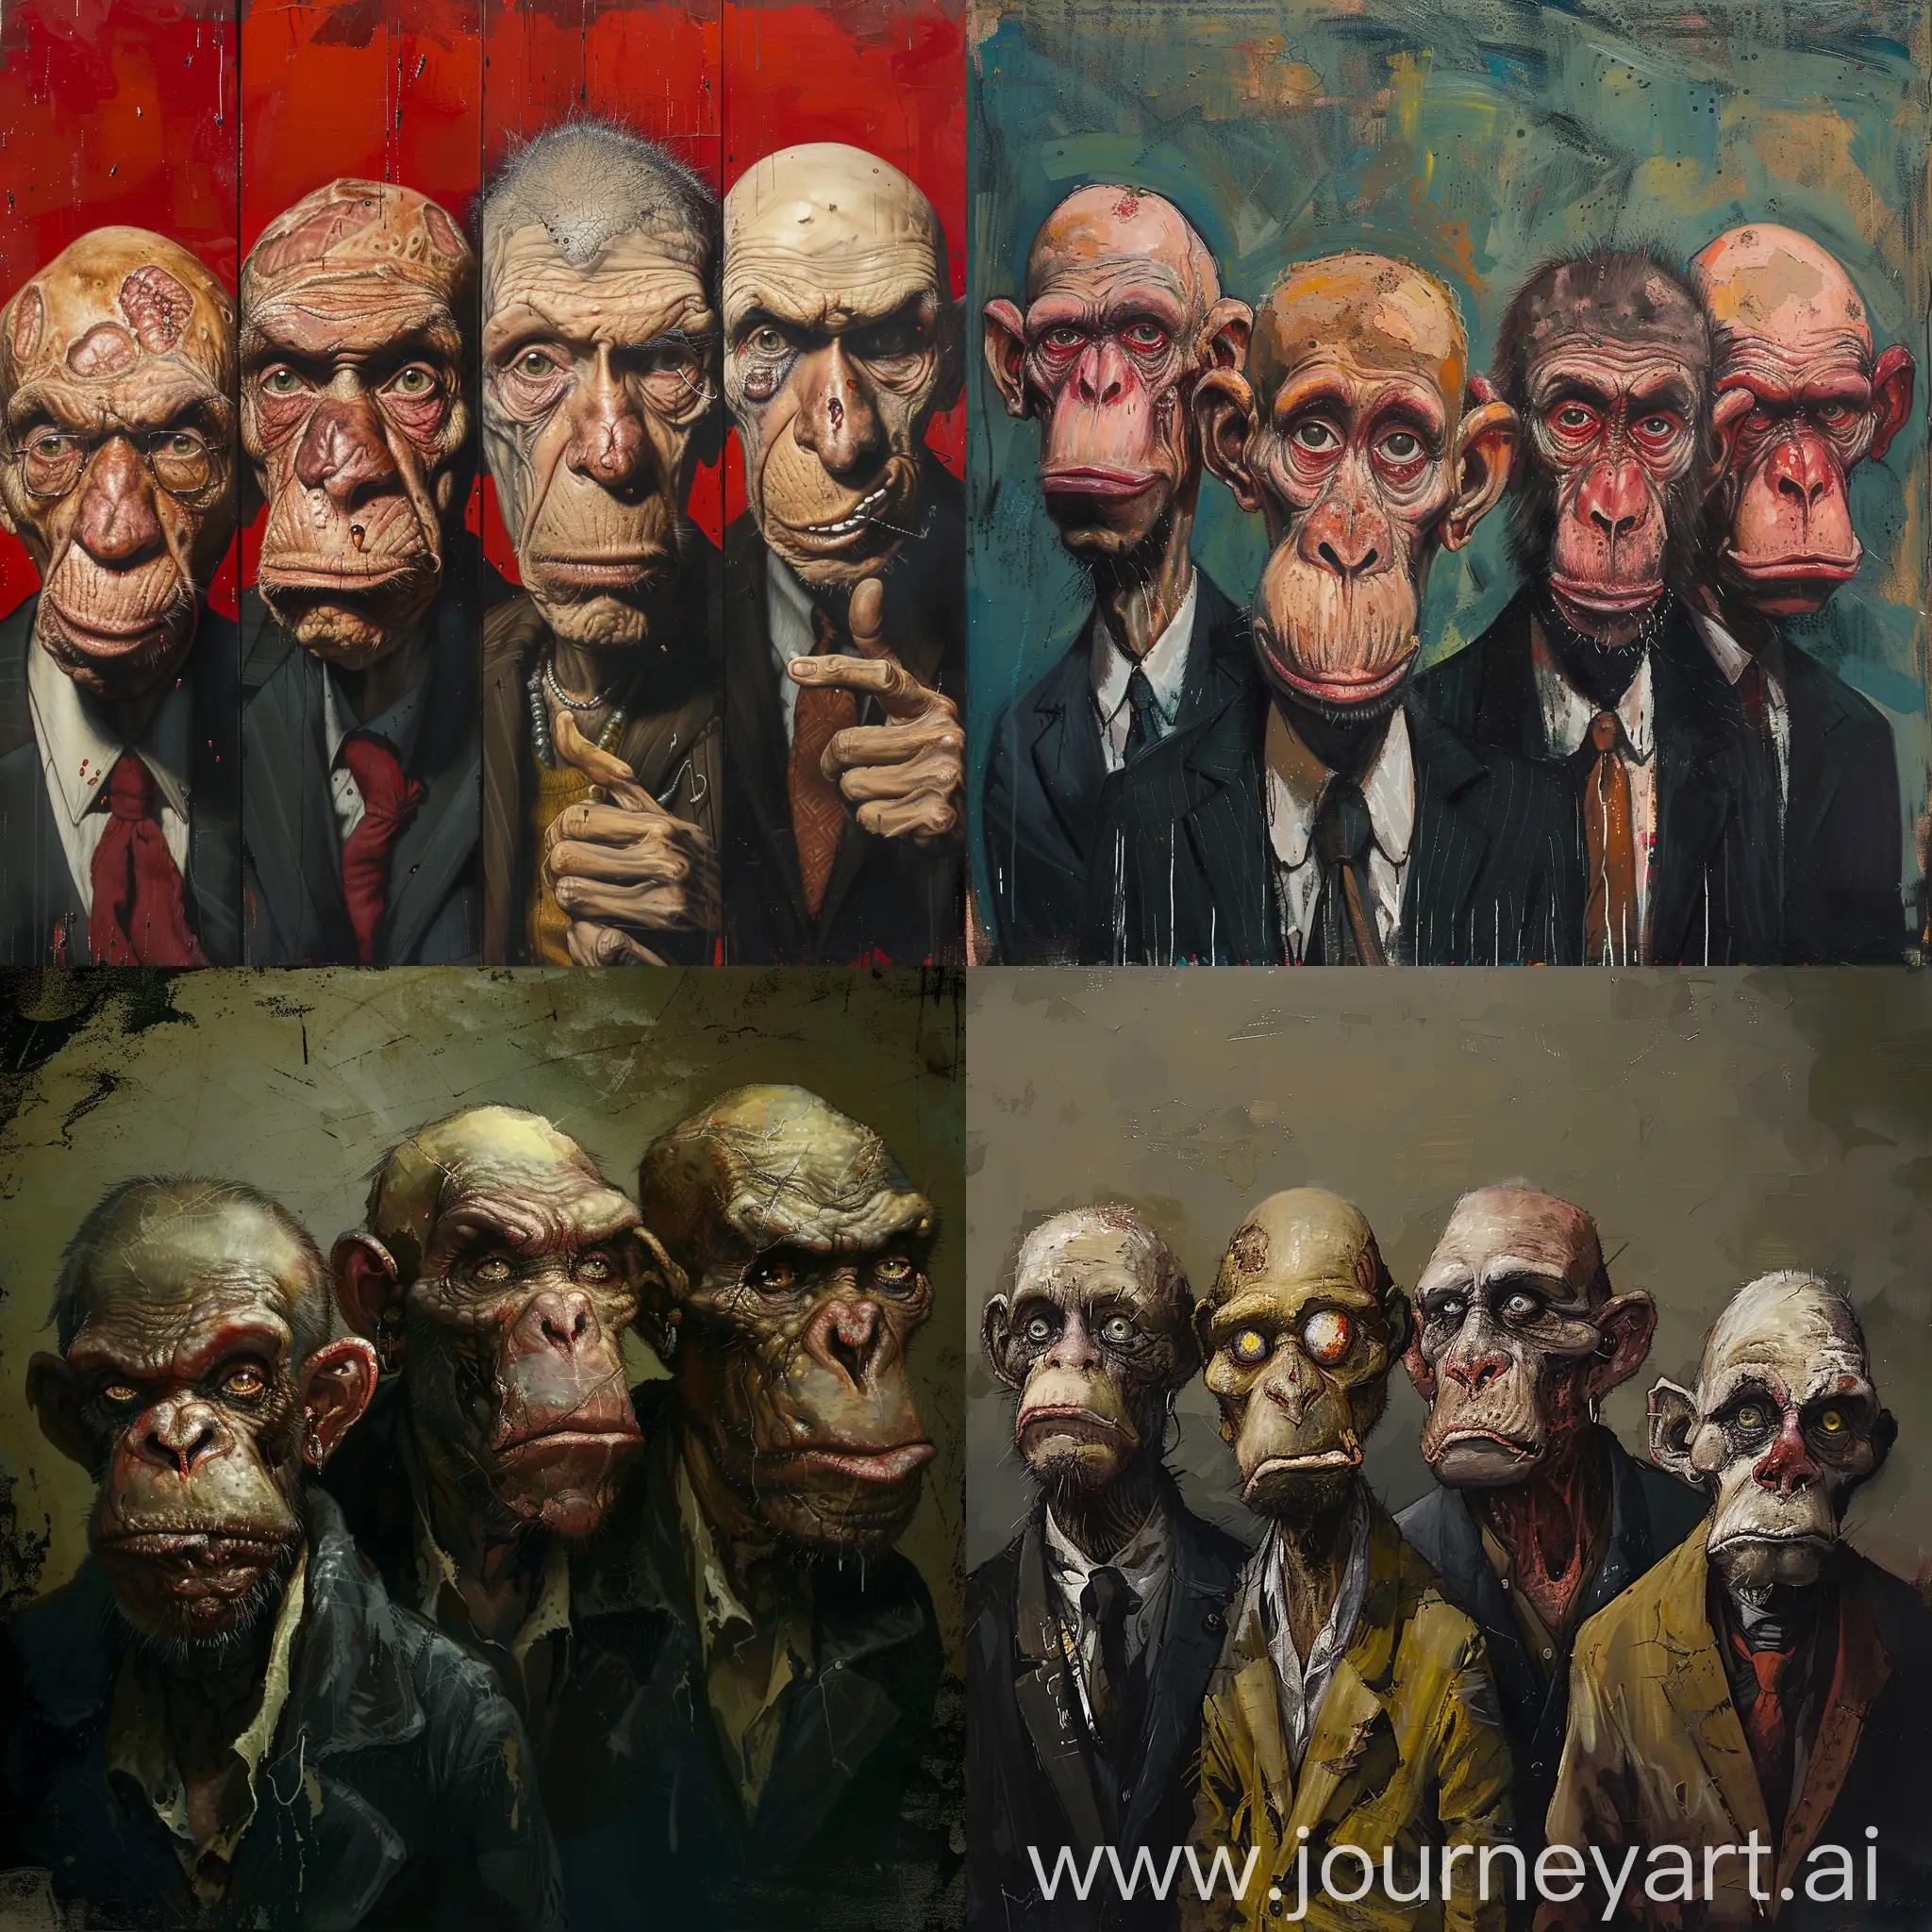 Gang of four men.  One is rotting, the second looks like a monkey, the third is bald, the fourth is the head of a gang.